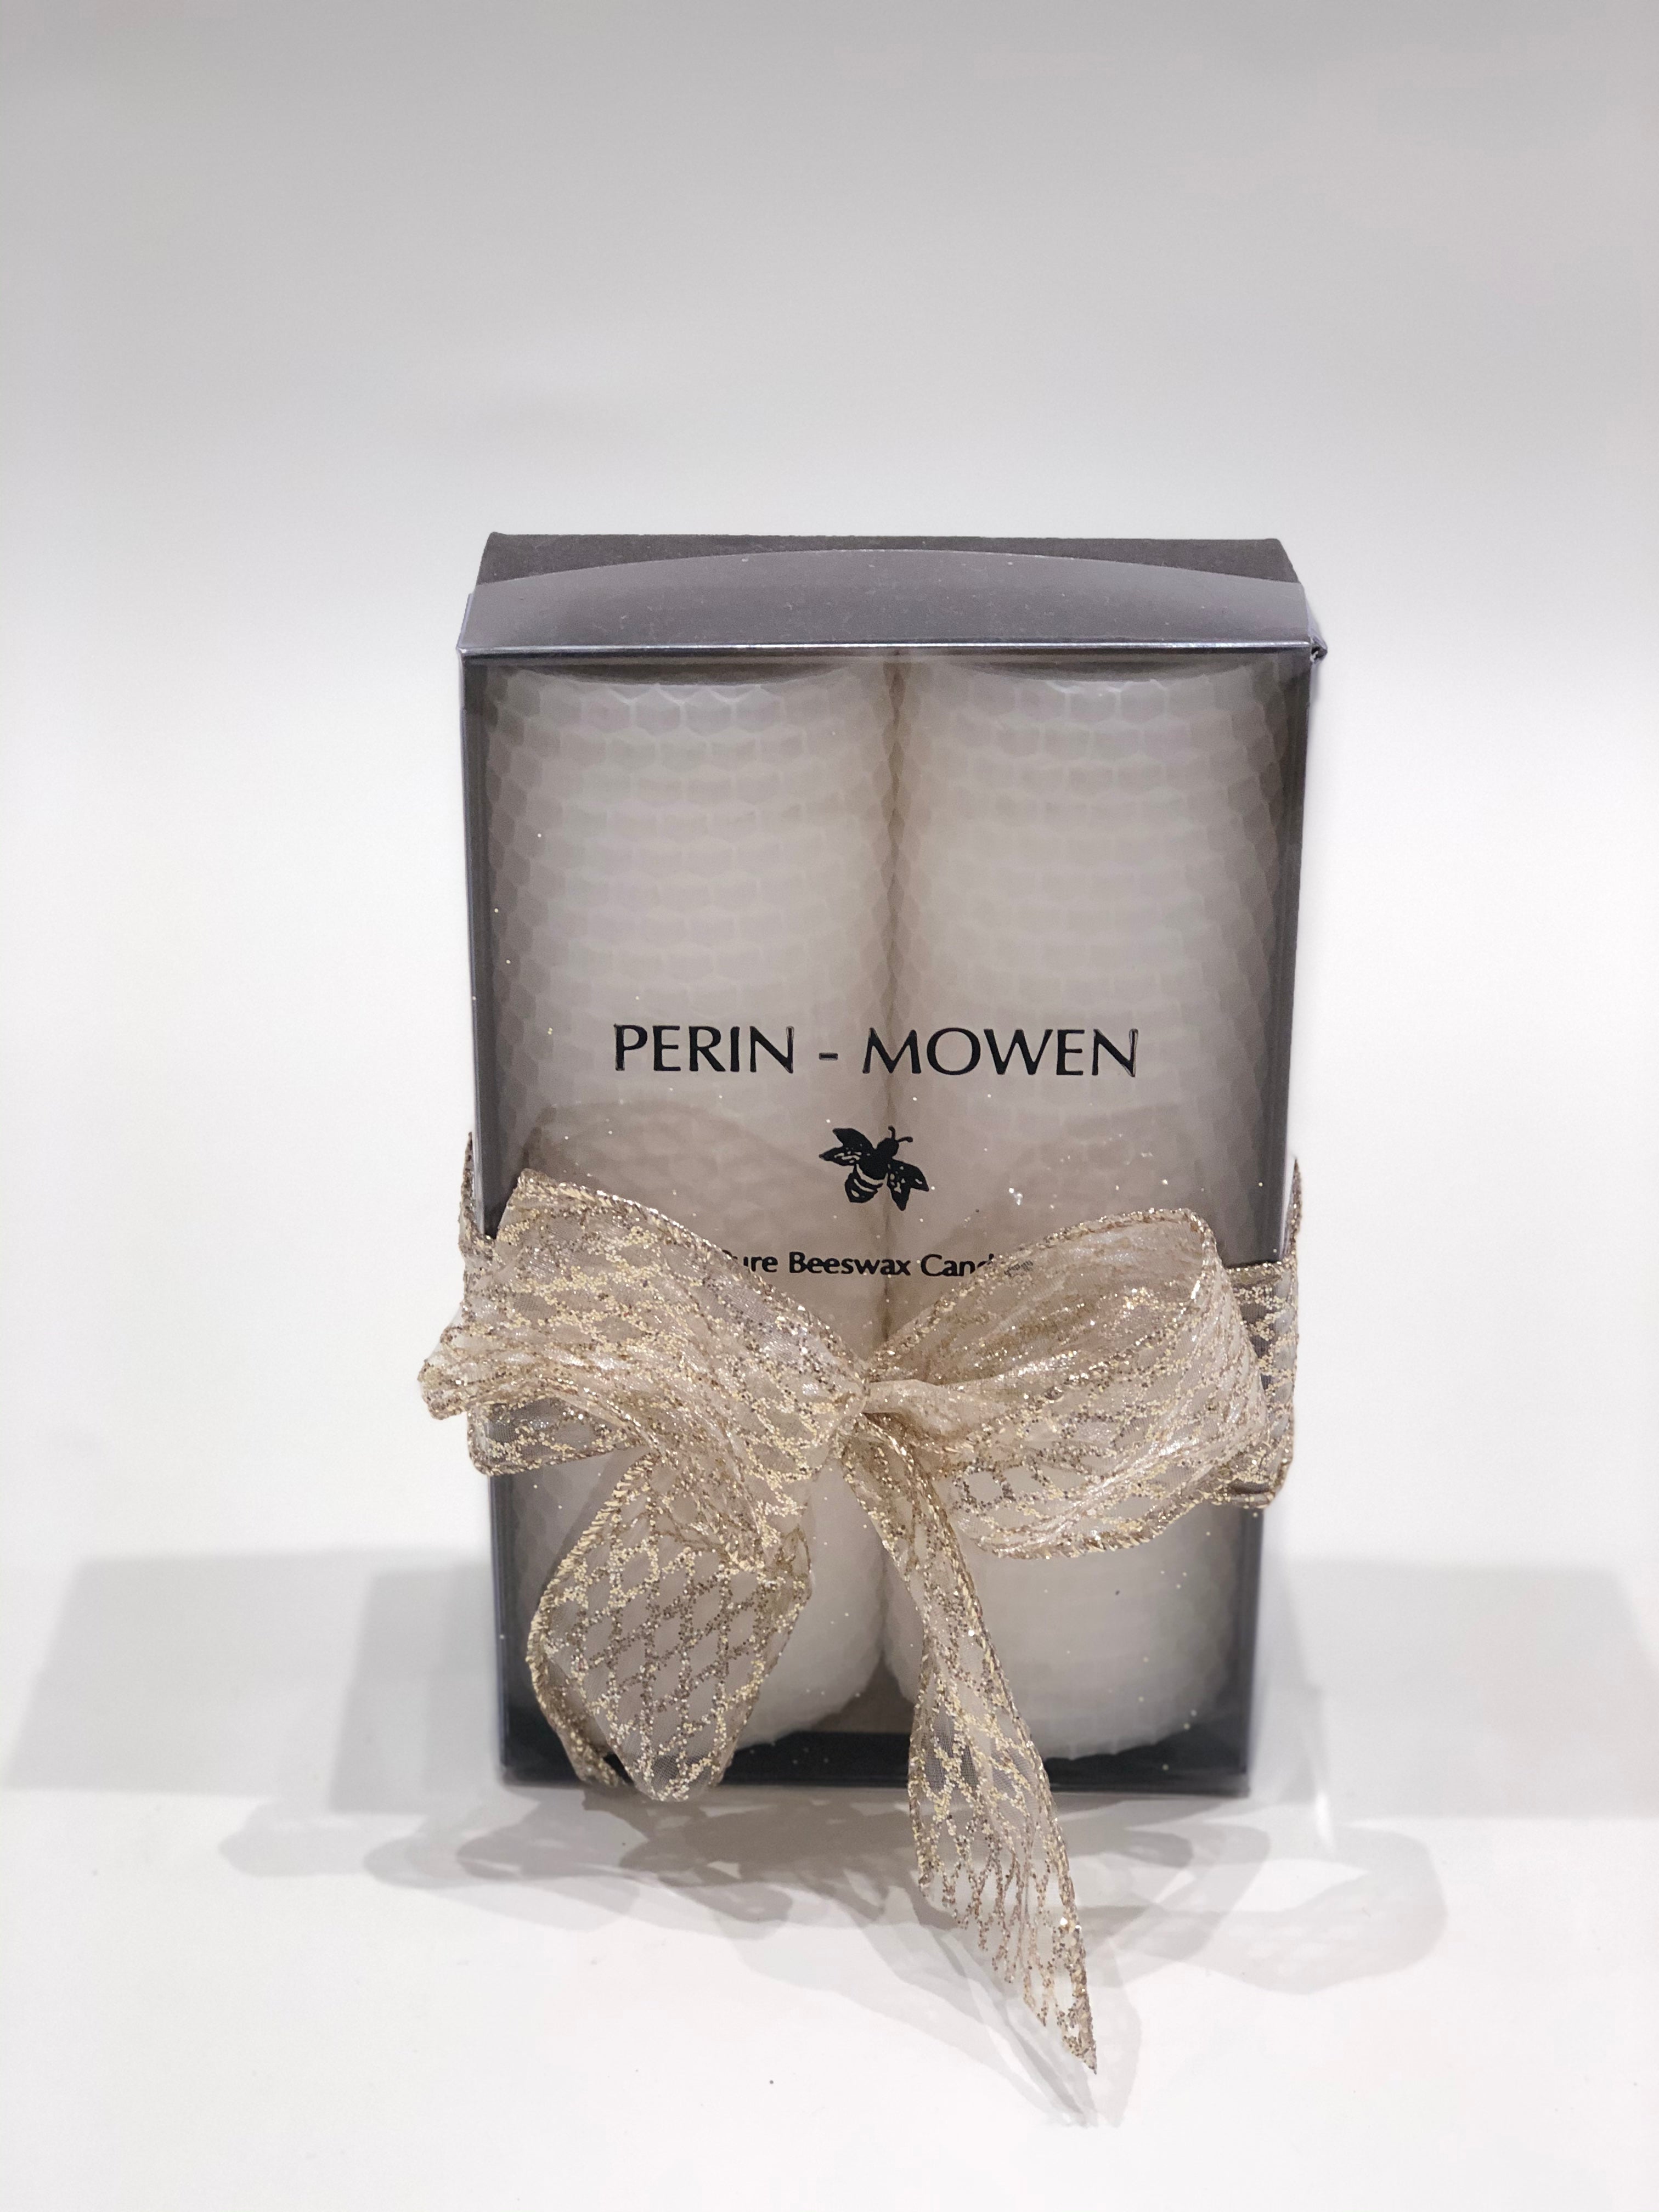 Perin-Mowen Double Pure Beeswax Candle